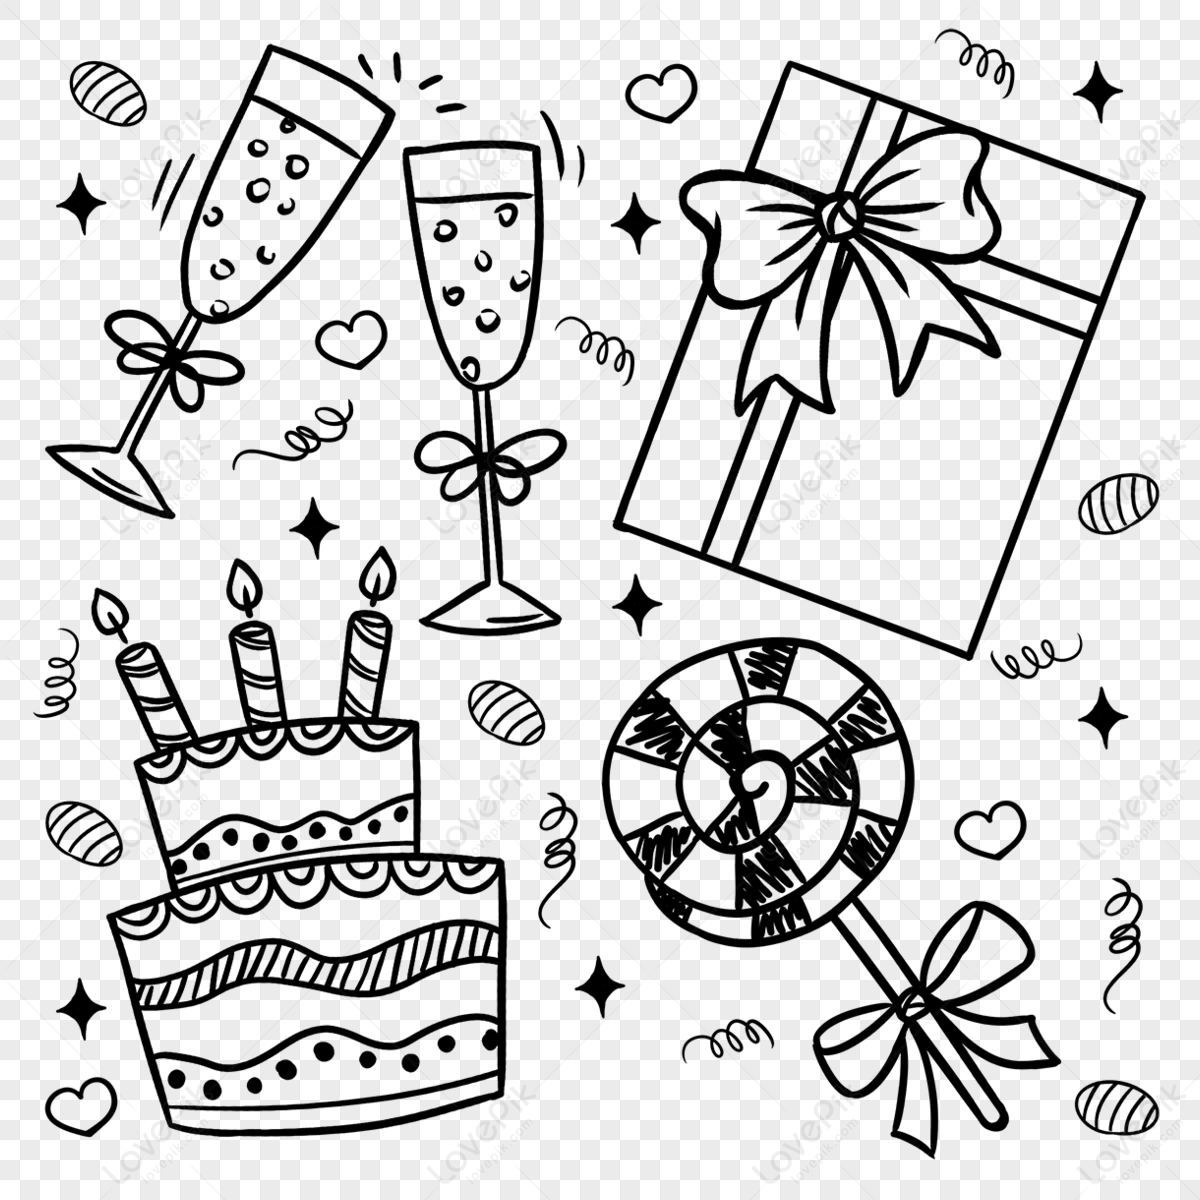 Hand Drawn Strawberry And Chocolate Cake And Dessert Collection In Doodle  Art Style On White Background Stock Illustration - Download Image Now -  iStock